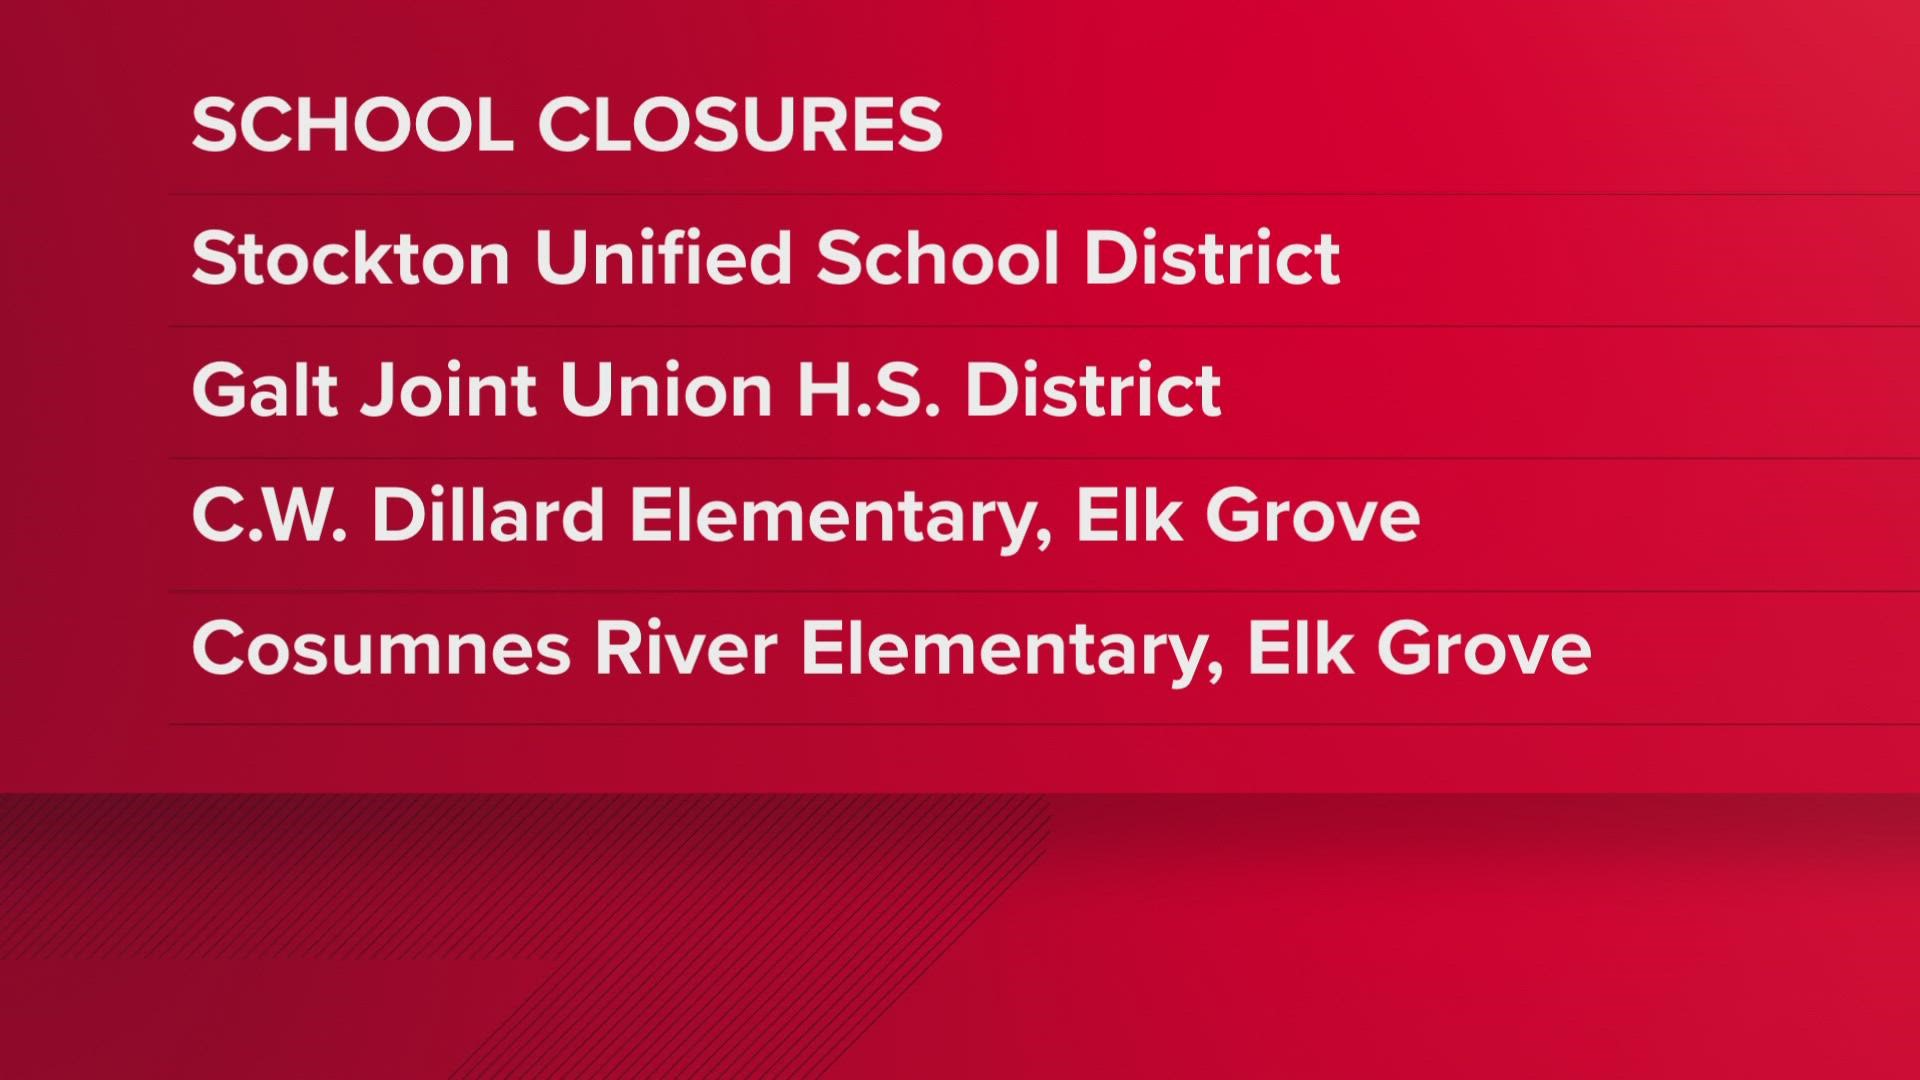 The Sacramento City, Stockton Unified, and Galt Join Union schools are closing their schools due to the winter storm.